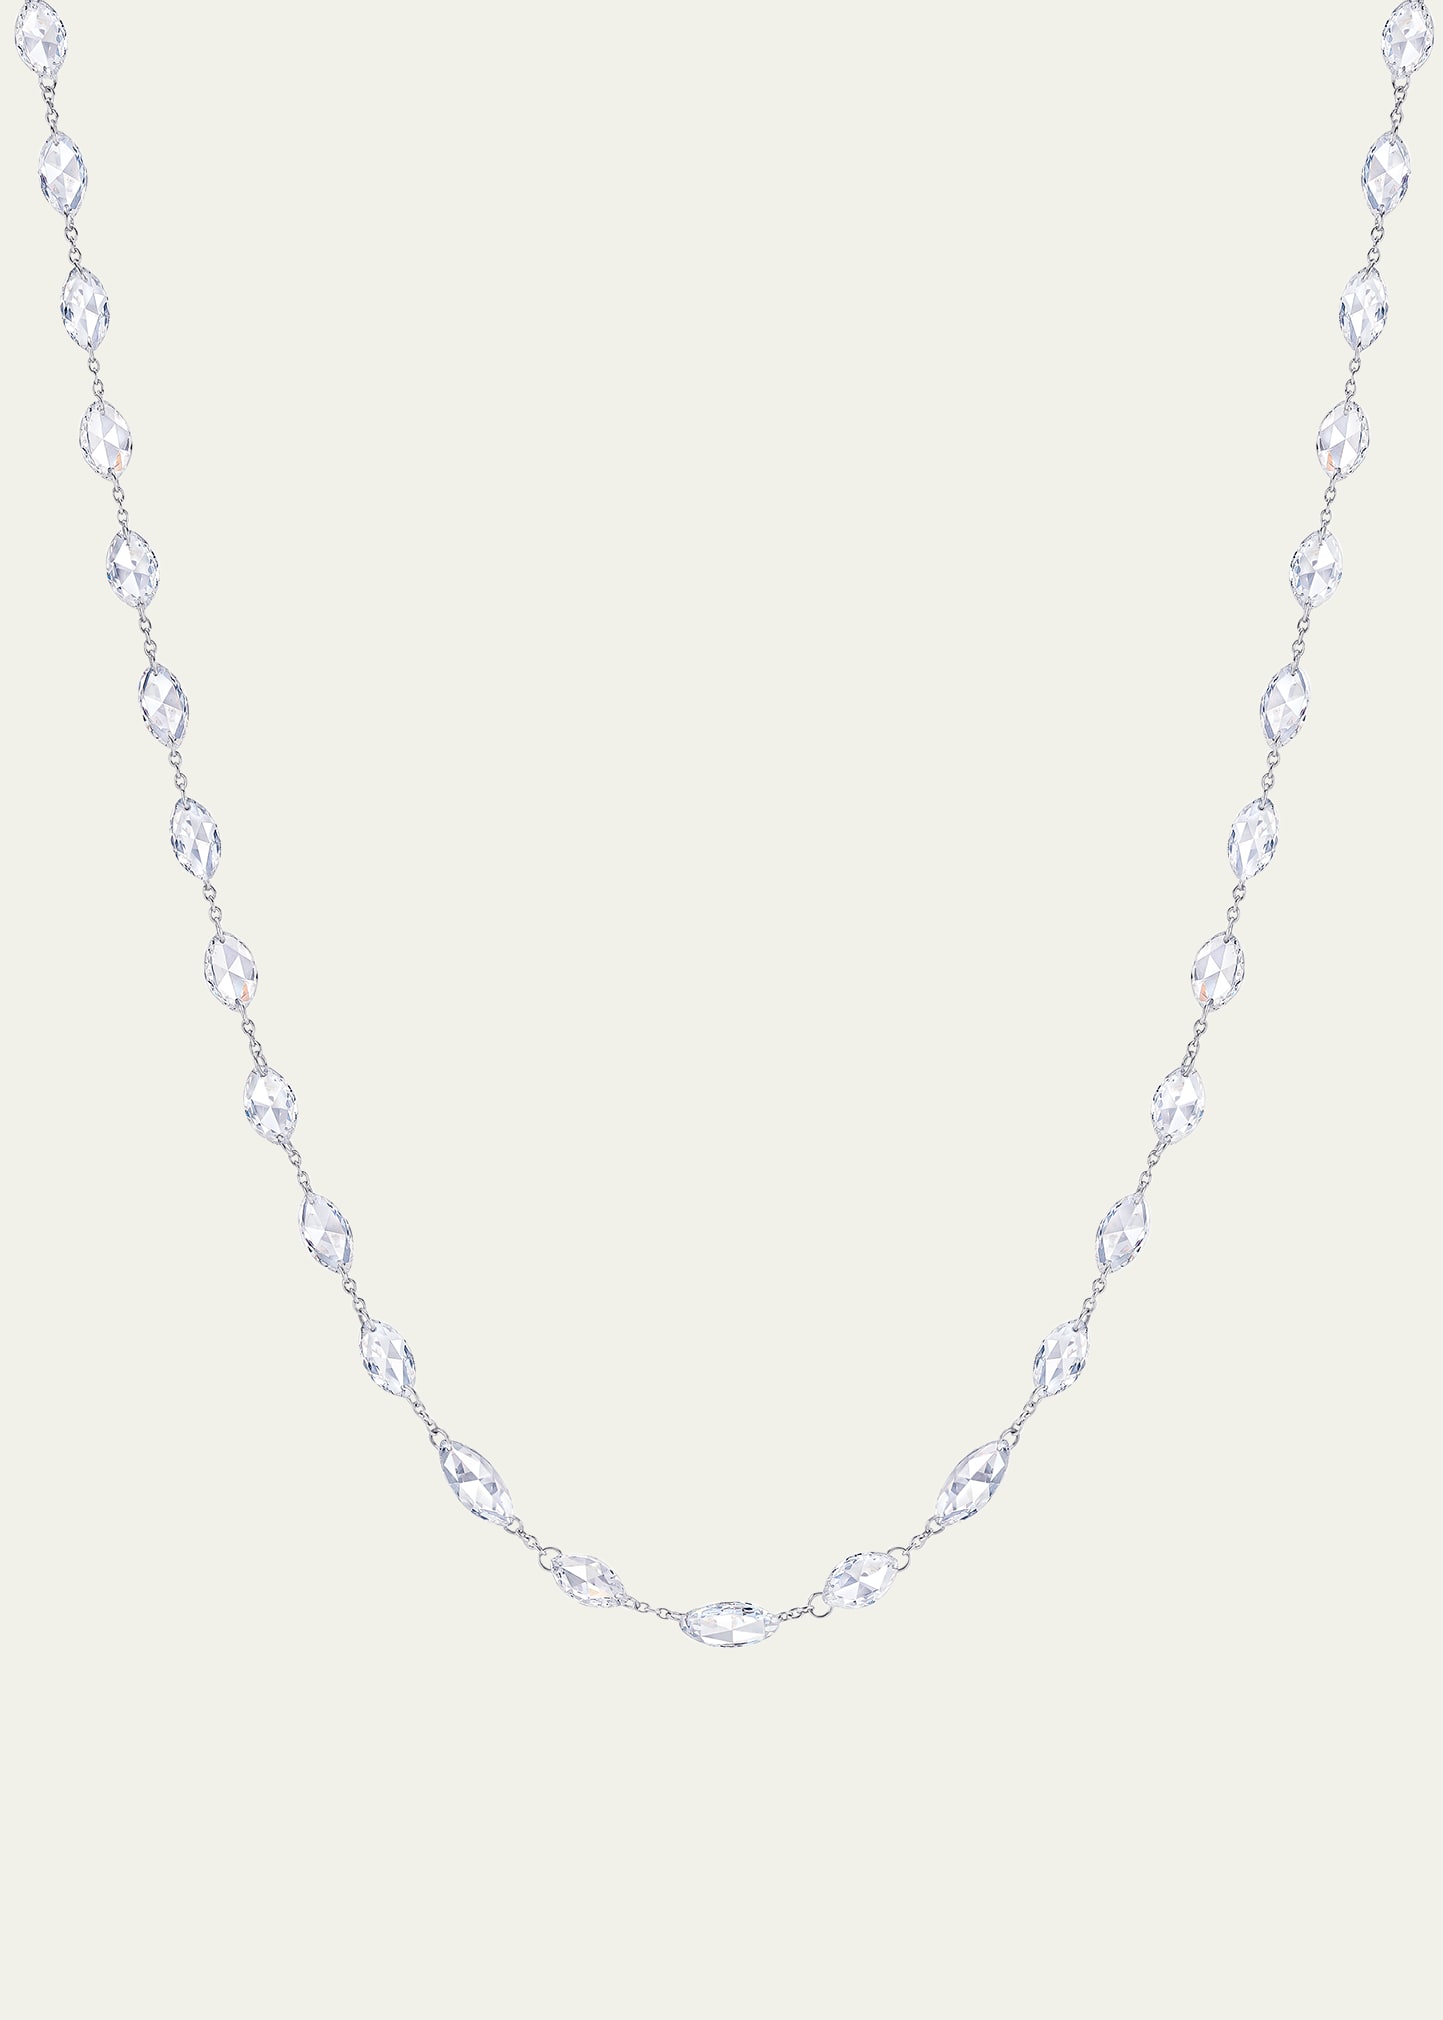 18K White Gold Necklace with Oval Rose Cut Diamonds, 18"L